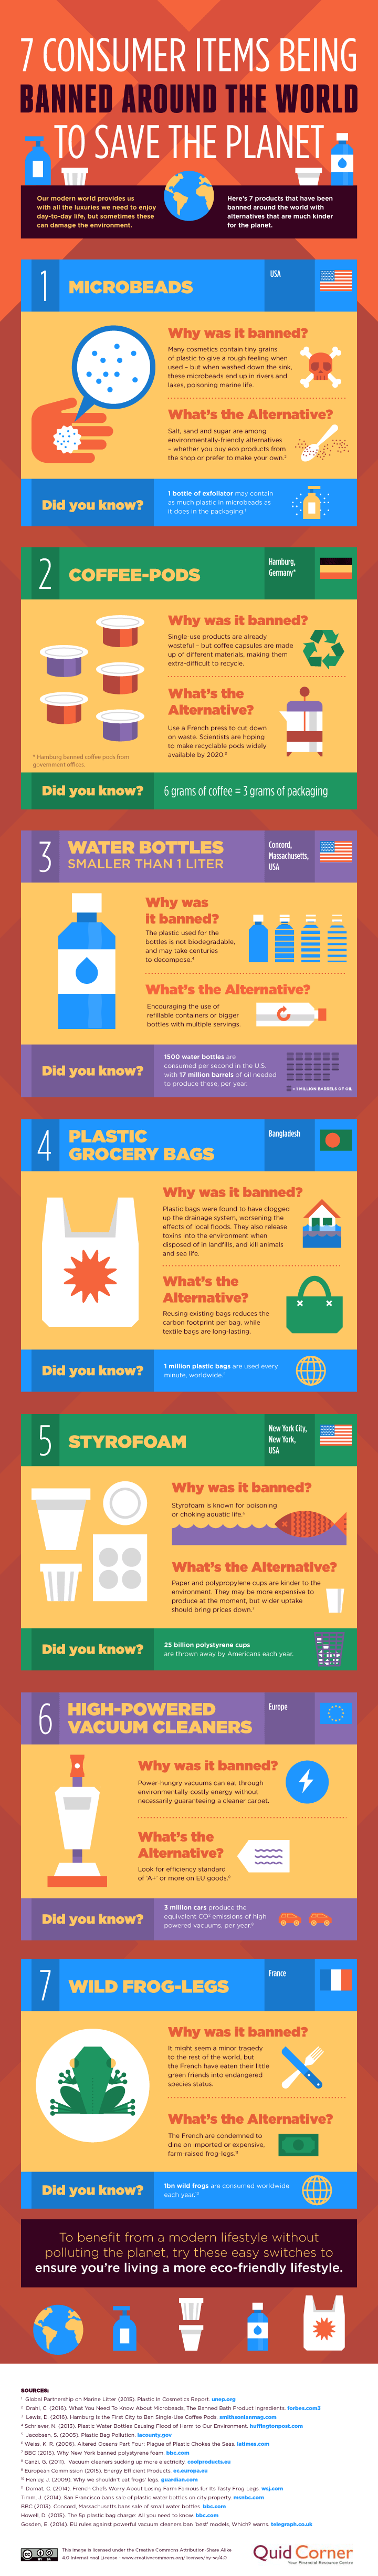 7 Consumer Items Being Banned Around the World to Save the Planet [Infographic] | ecogreenlove